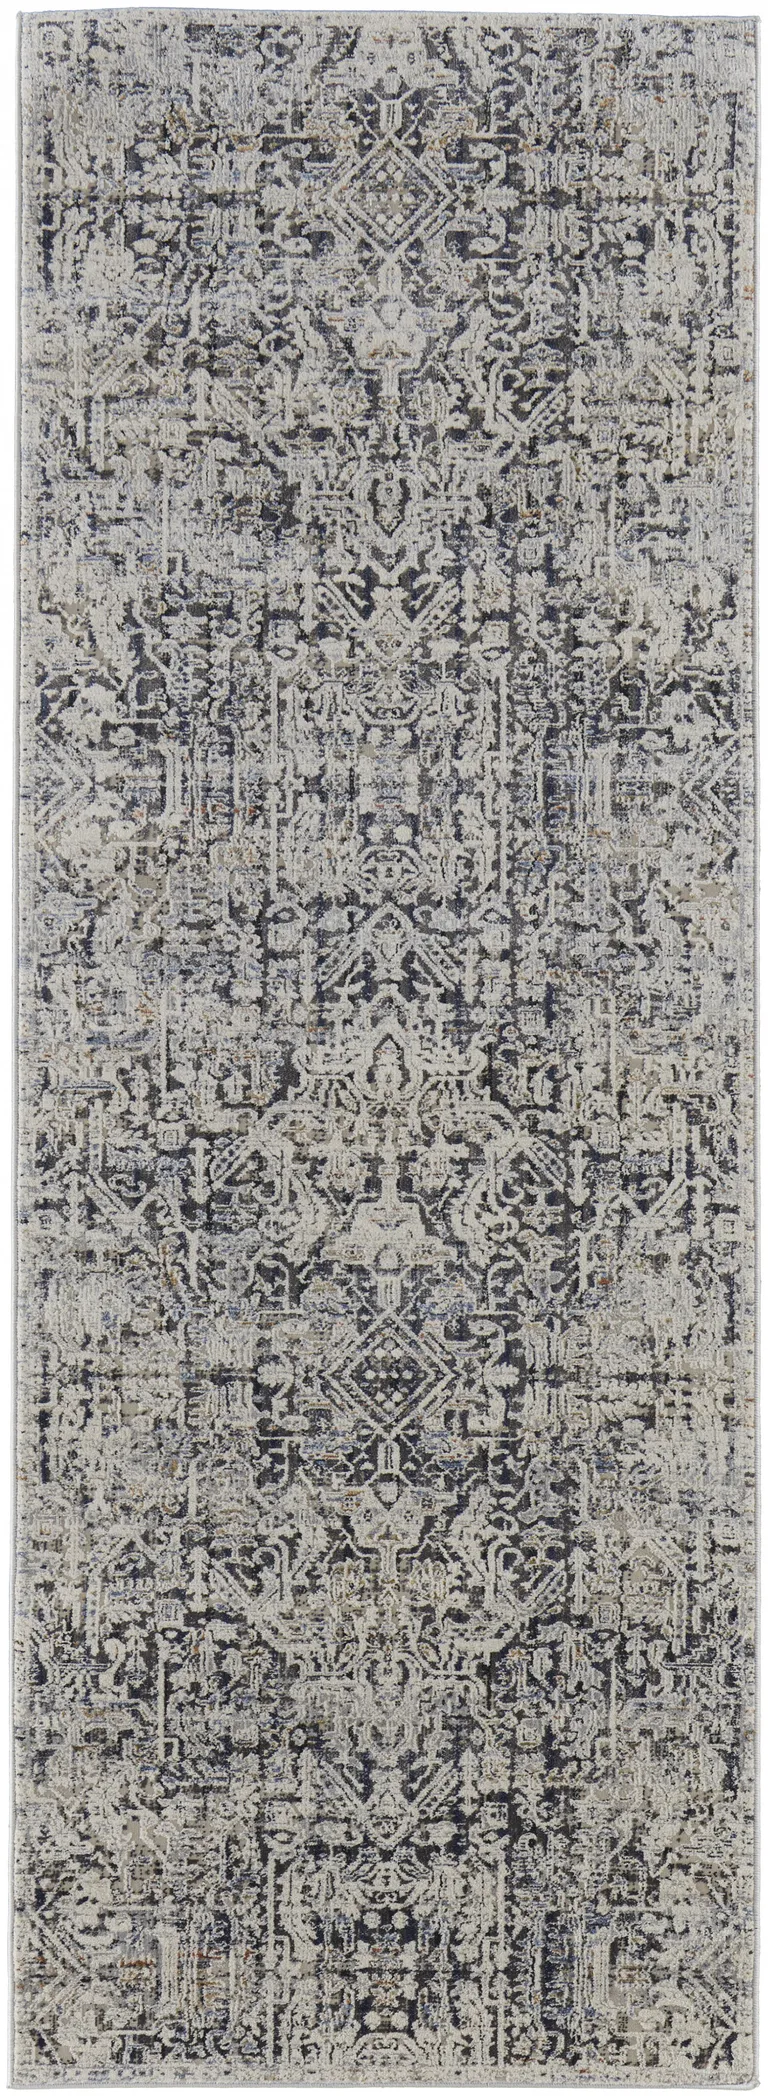 12' Ivory Gray And Taupe Abstract Power Loom Distressed Runner Rug With Fringe Photo 2